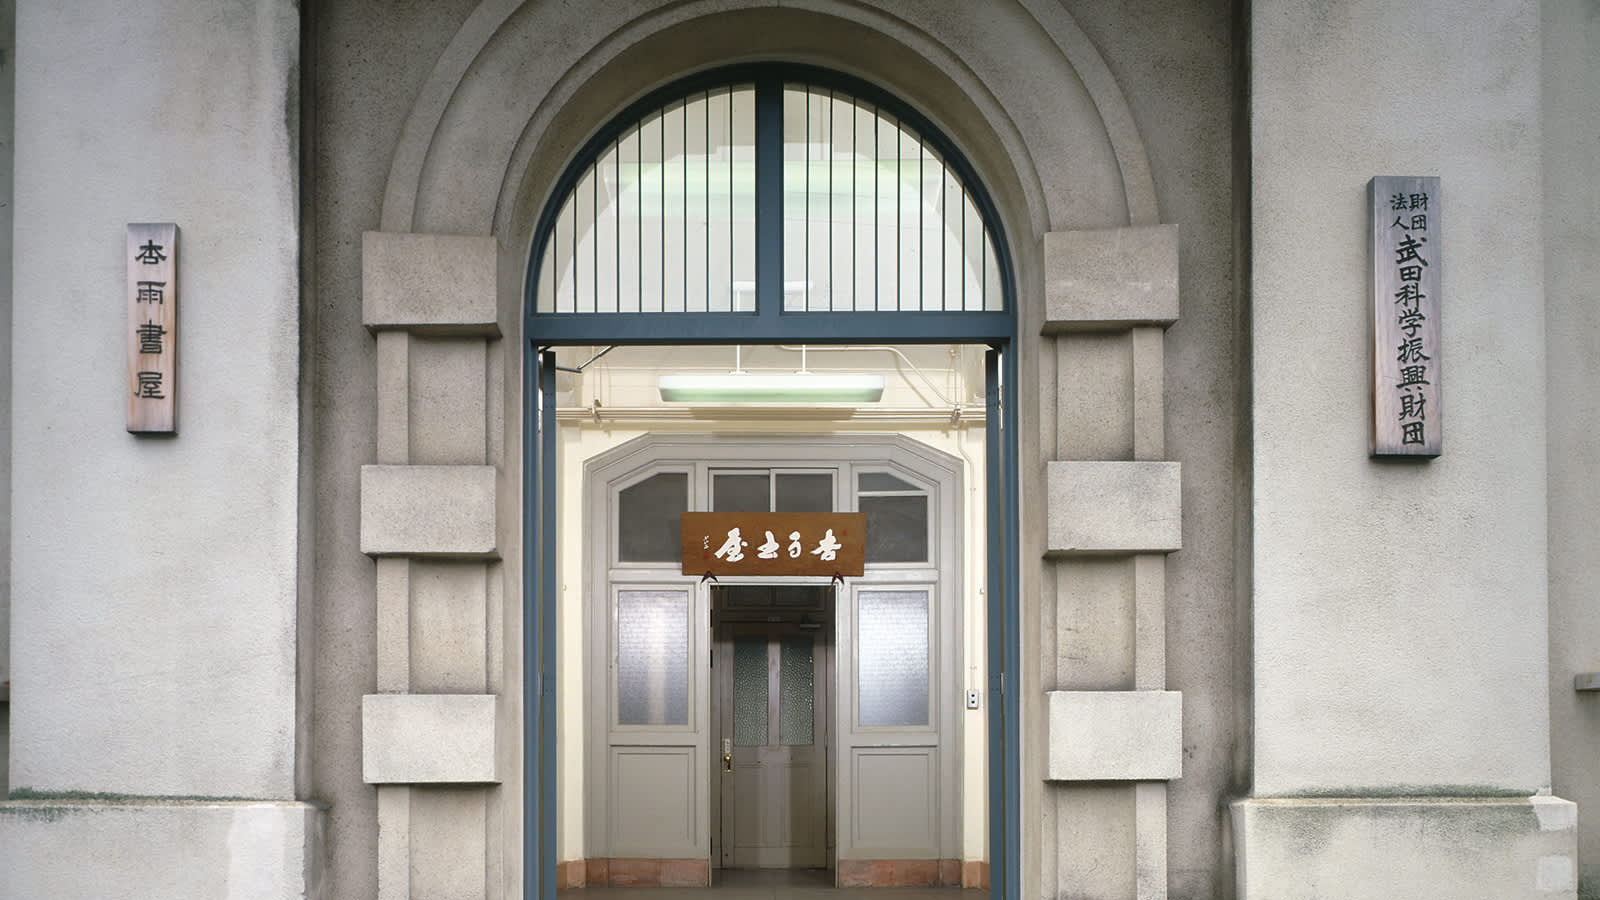 entry to a building with Japanese characters